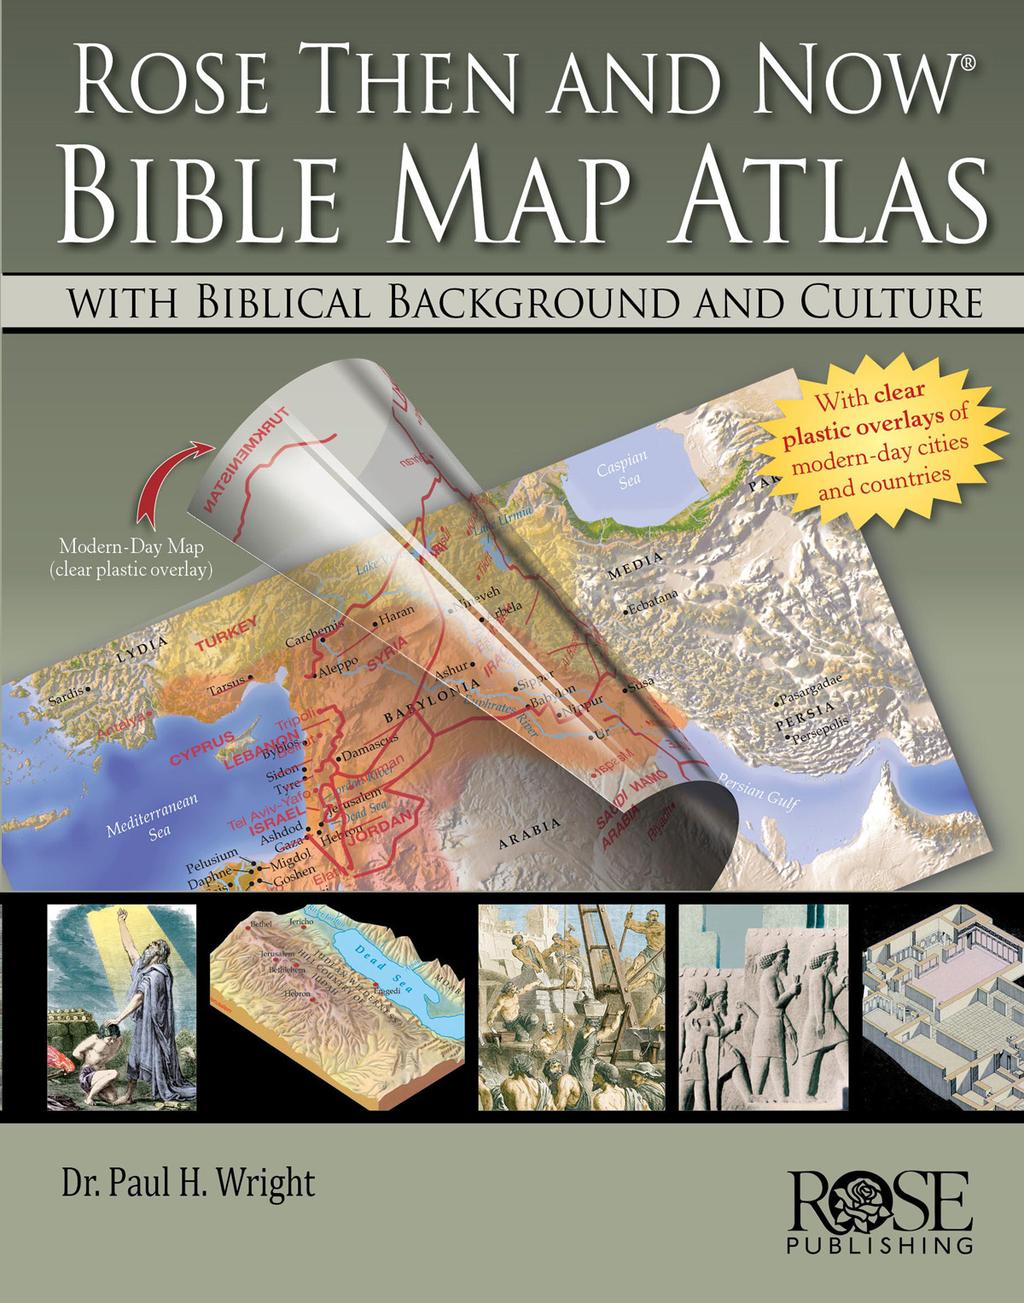 Rose Then and Now Bible Map Atlas with Biblical Background and Culture (See endorsements, pg. 2-3) Rose Publishing and Dr. Paul H.